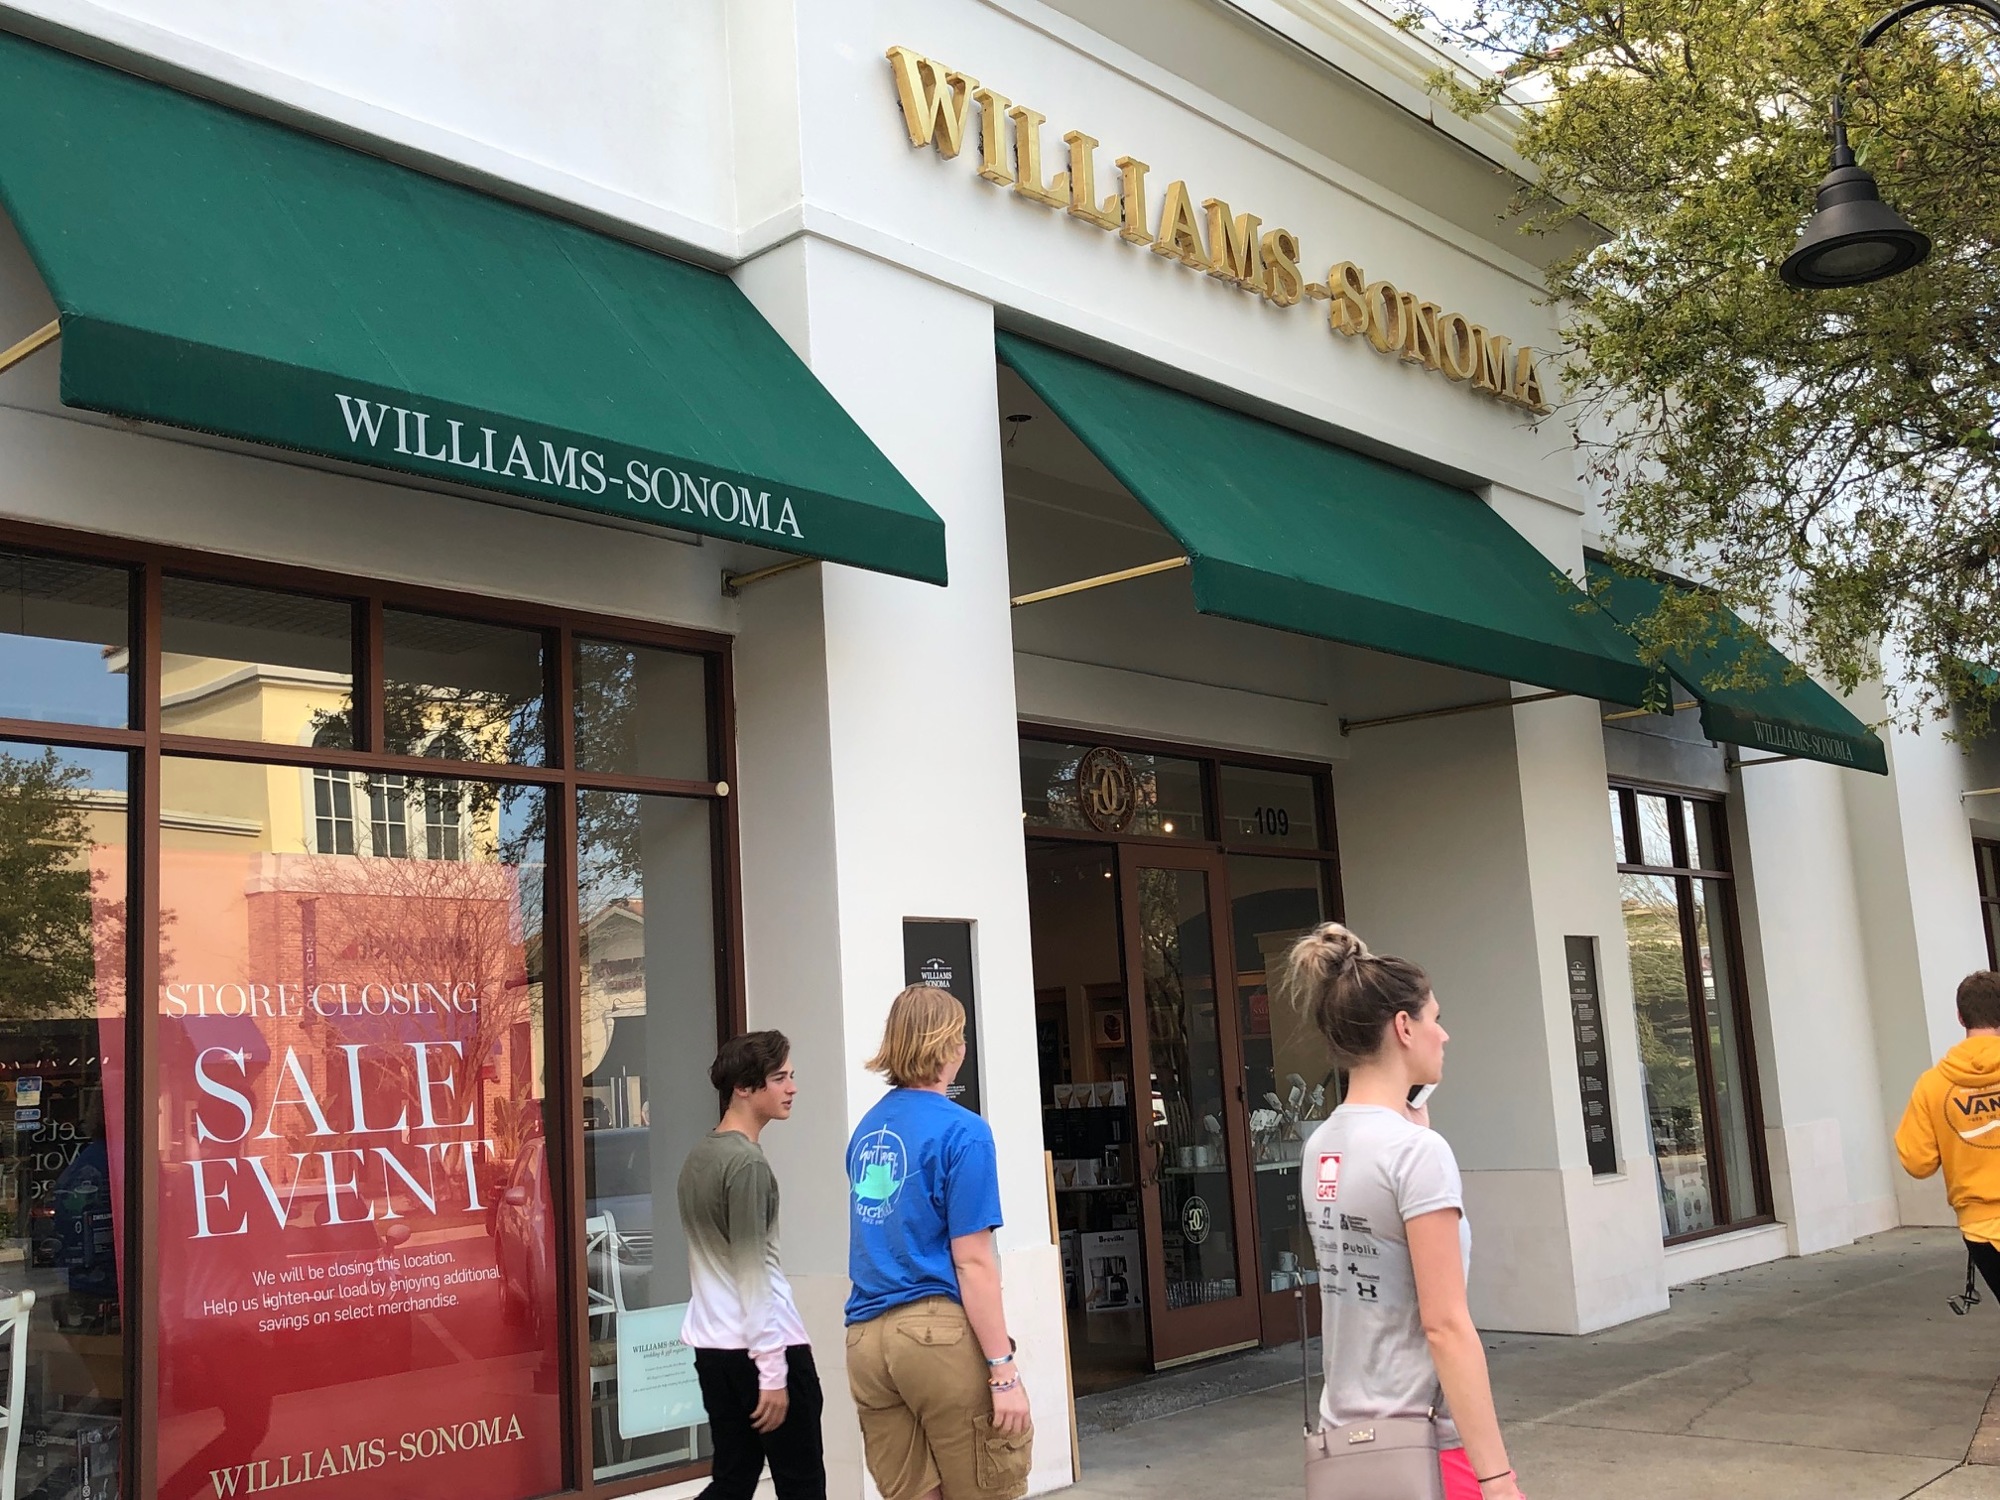 Williams-Sonoma is selling its housewares at a discount in anticipation of shutting its doors at St. Johns Town Center.